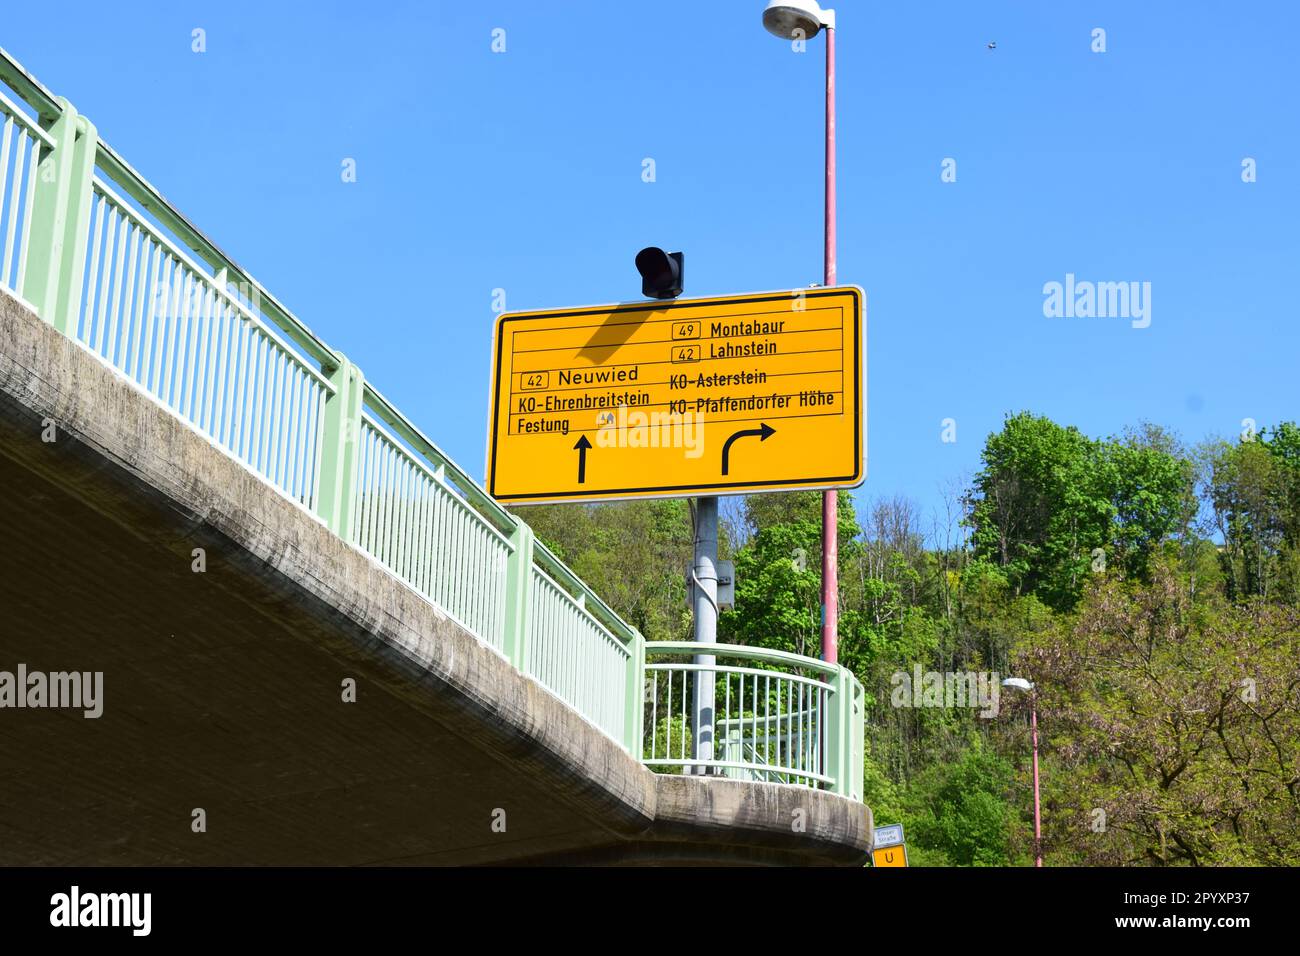 Traffic Sign in Koblenz on a Bridge Stock Photo